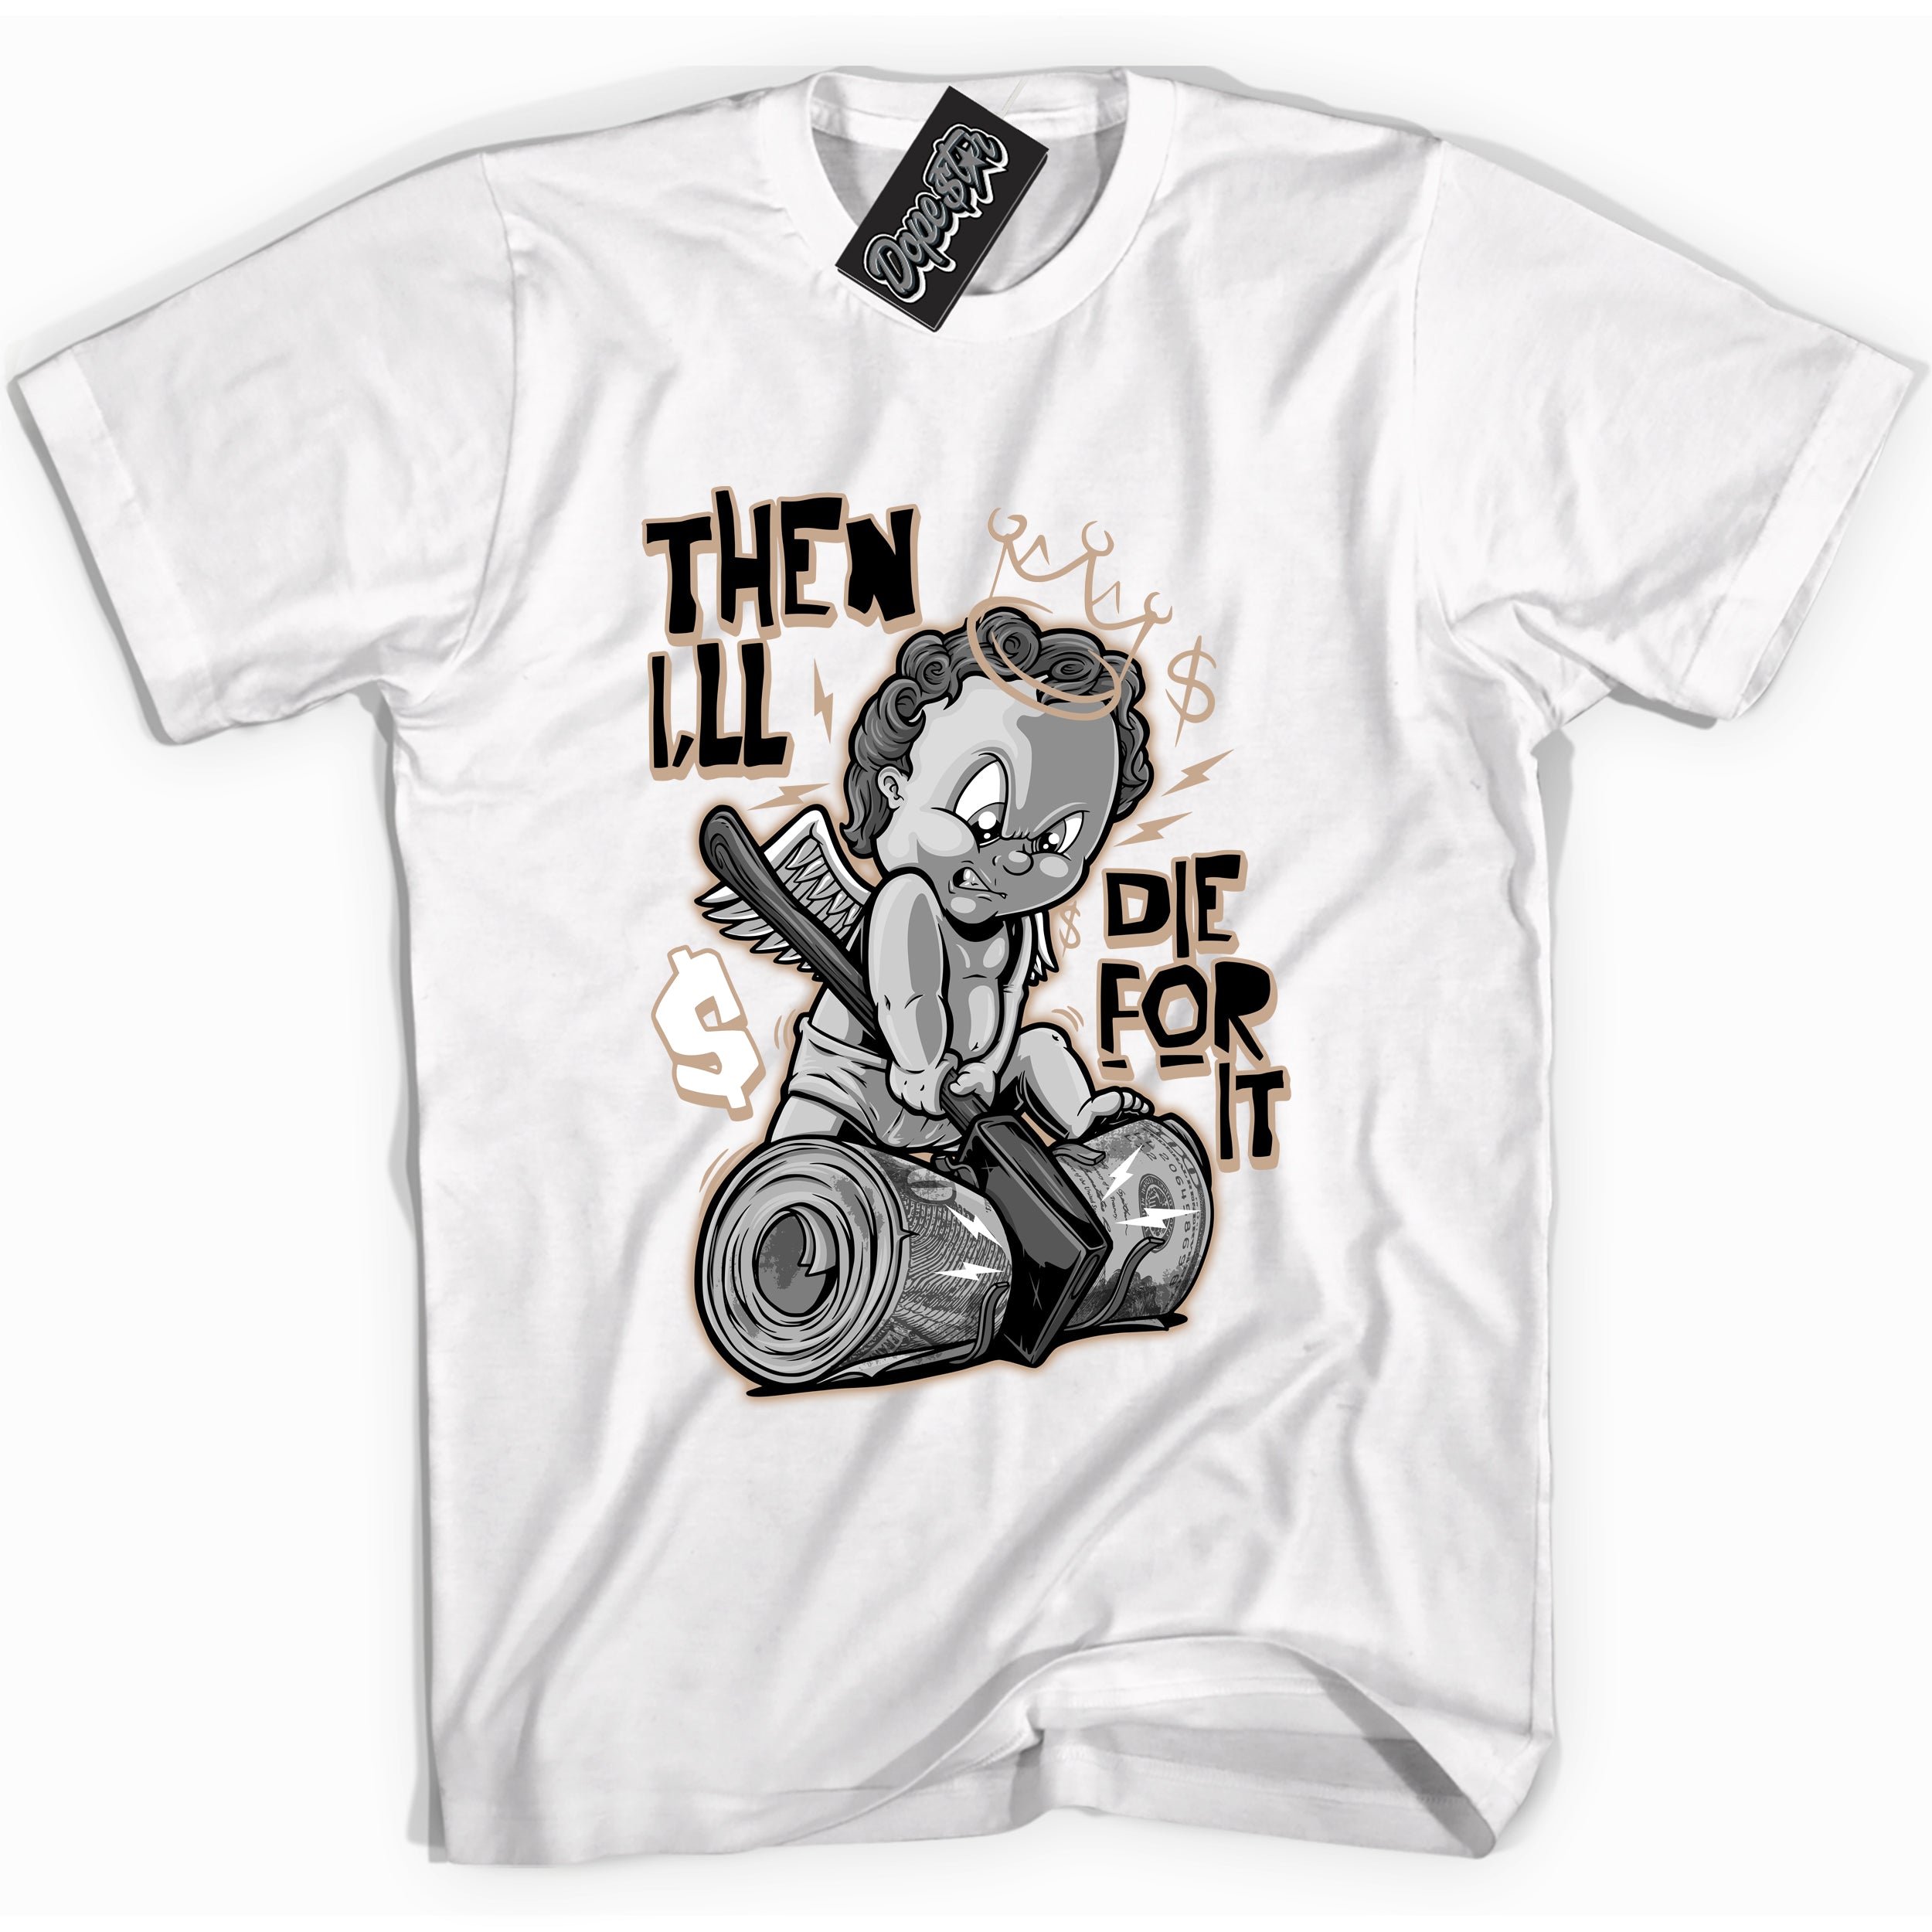 Cool White graphic tee with “ Then I'll ” design, that perfectly matches Palomino 1s sneakers 